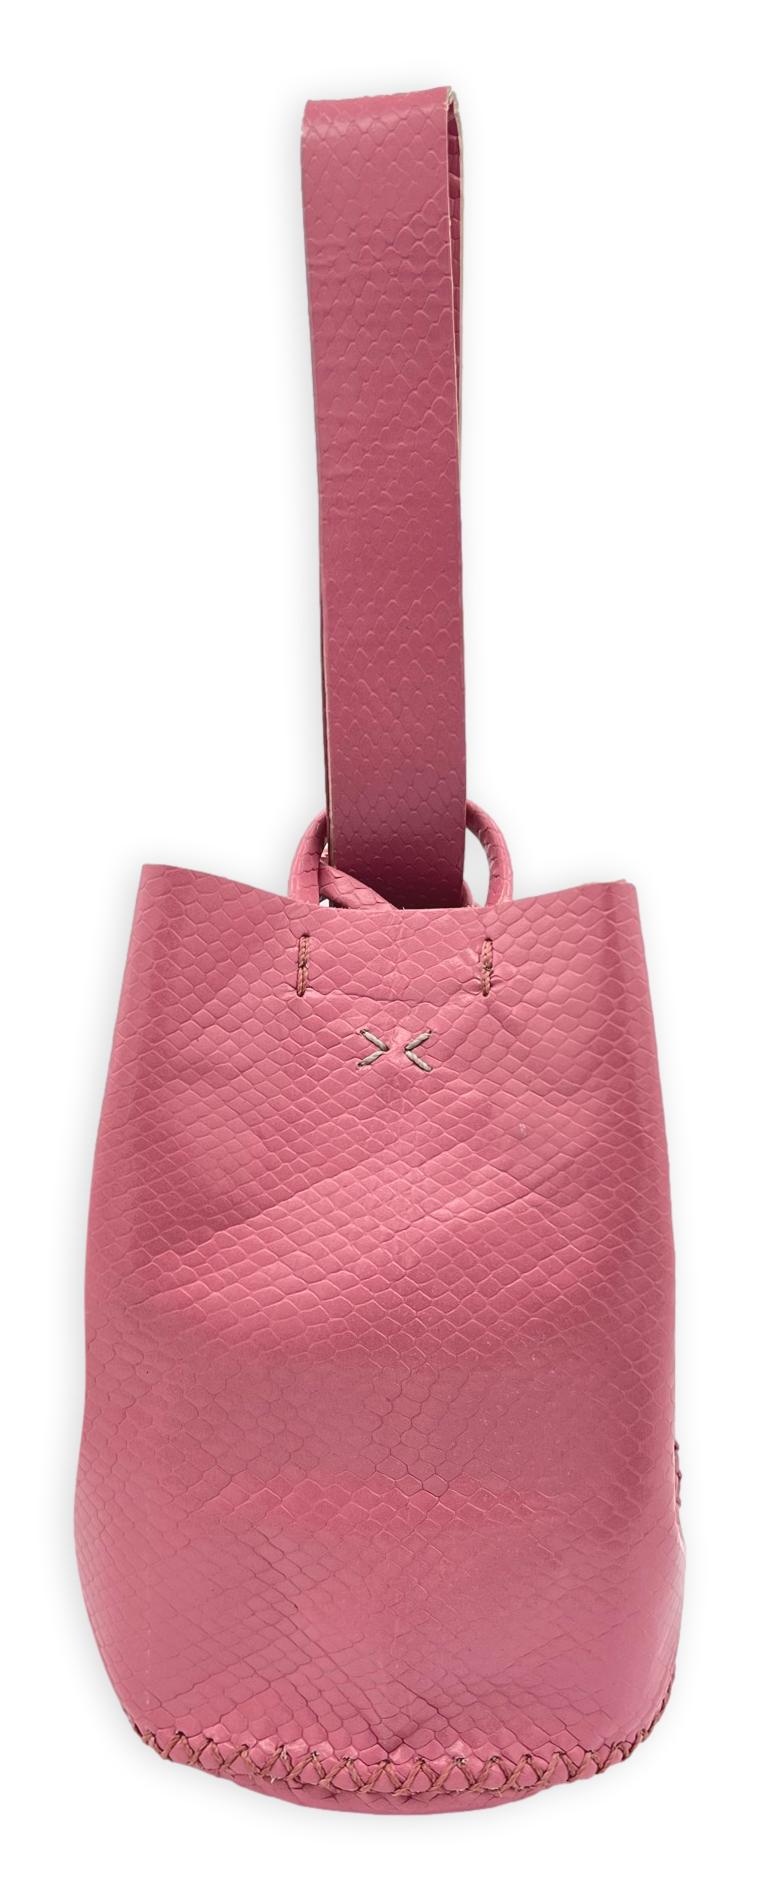 navigli bag | bubble gum pink upcycled leather